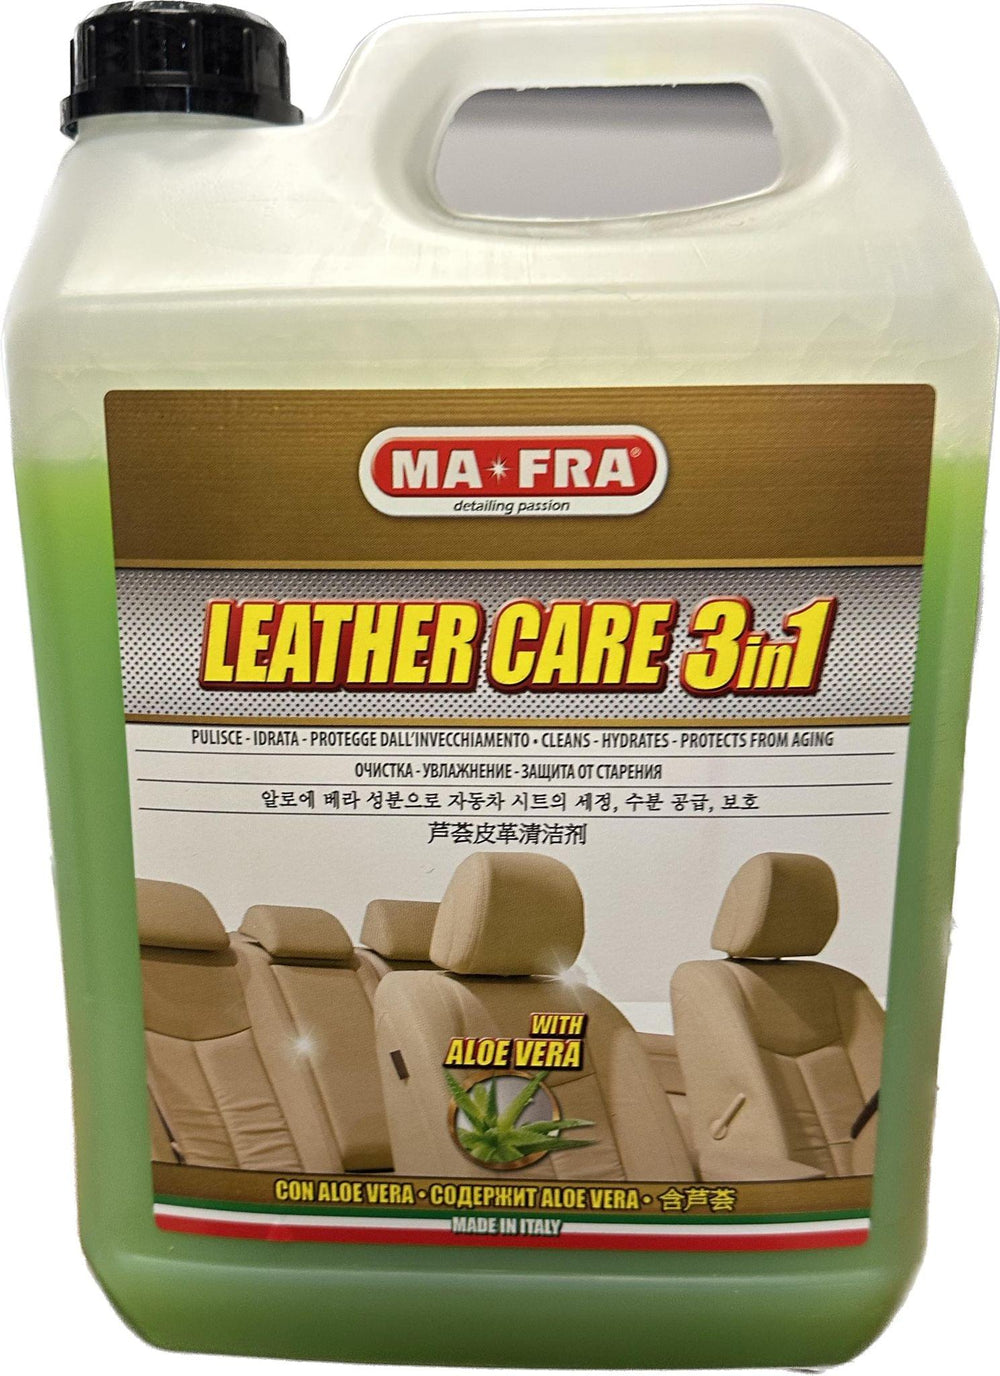 3-in-1 Leather Care - Cleans, Hydrates, Protectes